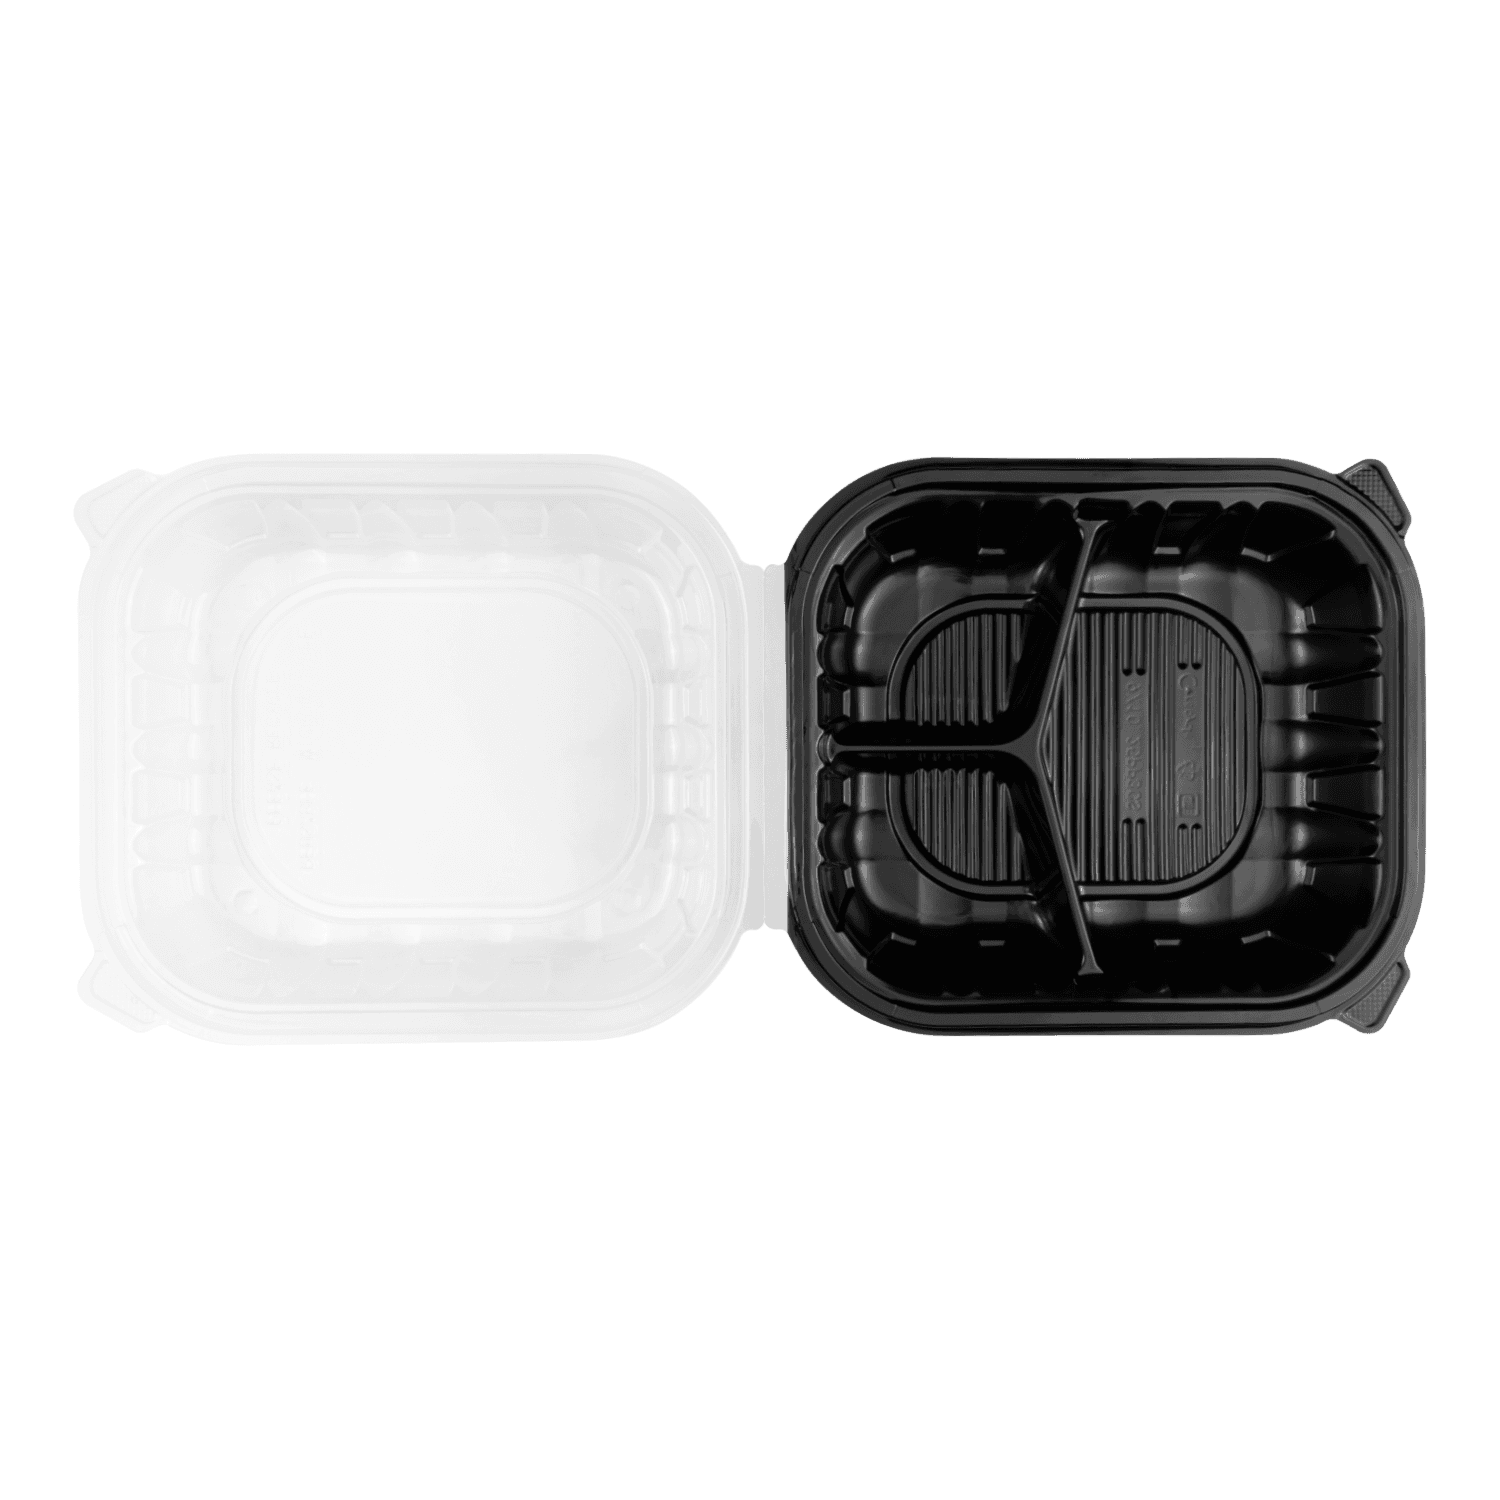 Top view of Black and Clear Karat 10.25"x 9" Premium PP Hinged Container with 3 compartments